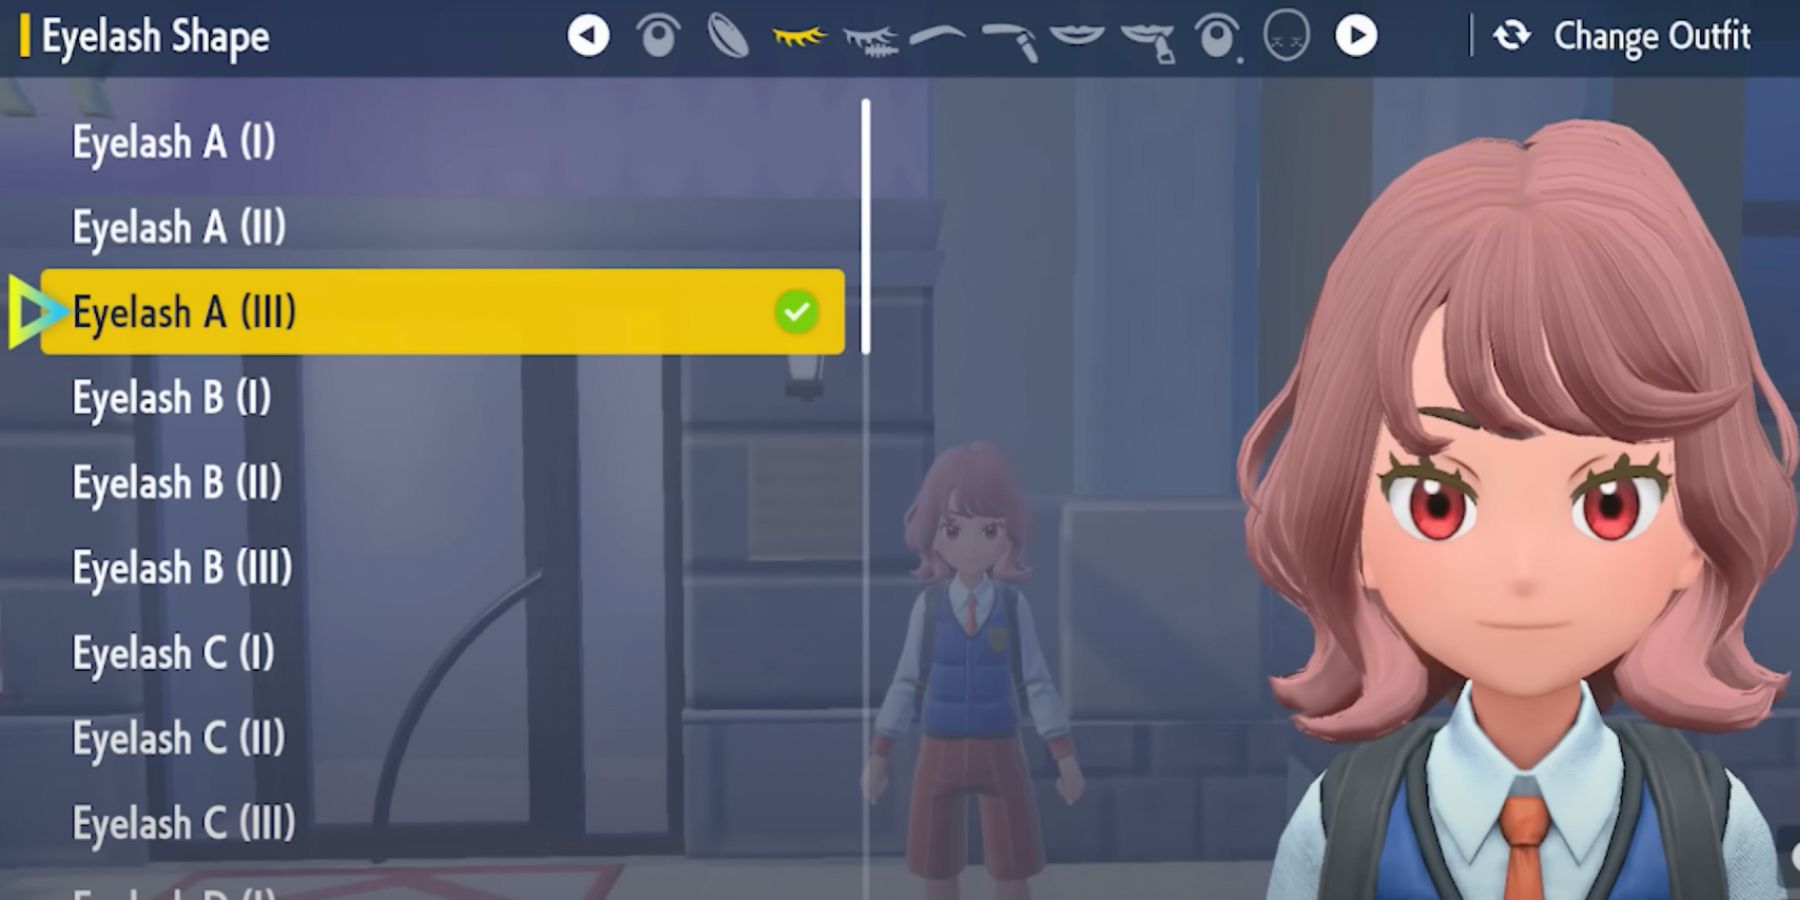 The Pokémon Scarlet & Violet character customization menu, showing the player changing eyelashes.